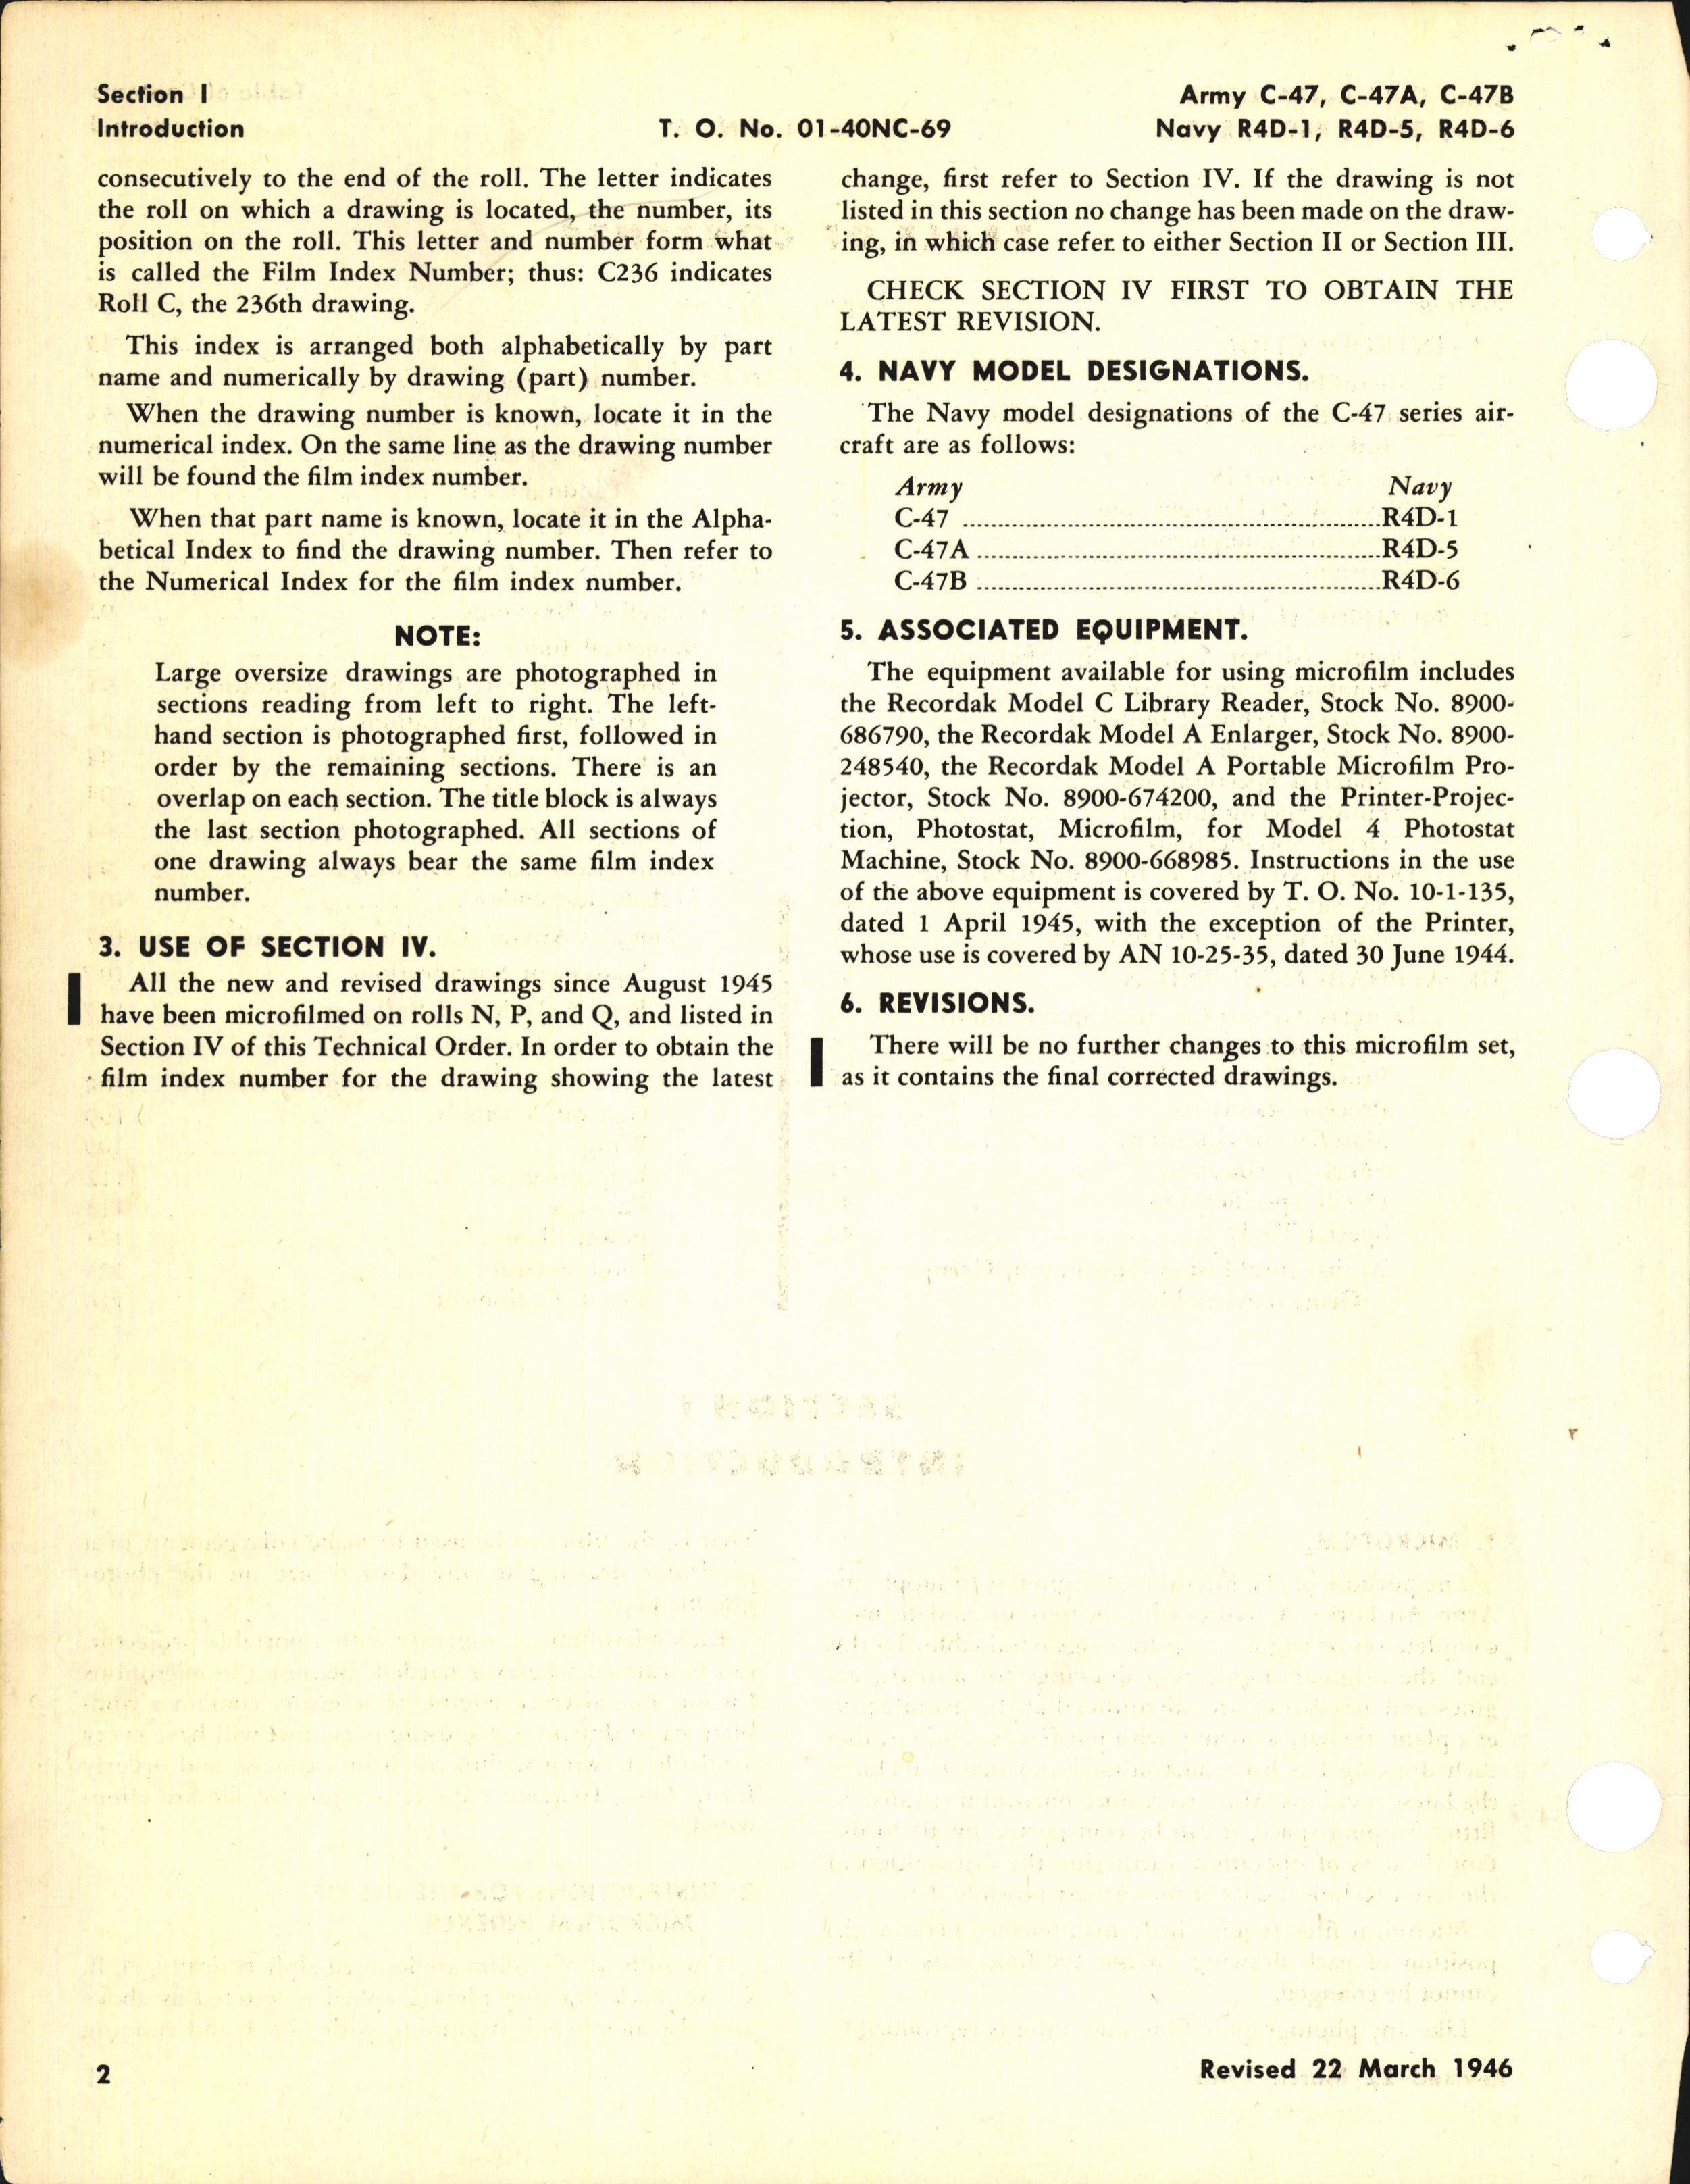 Sample page 6 from AirCorps Library document: Index of Drawings on Microfilm for C-47